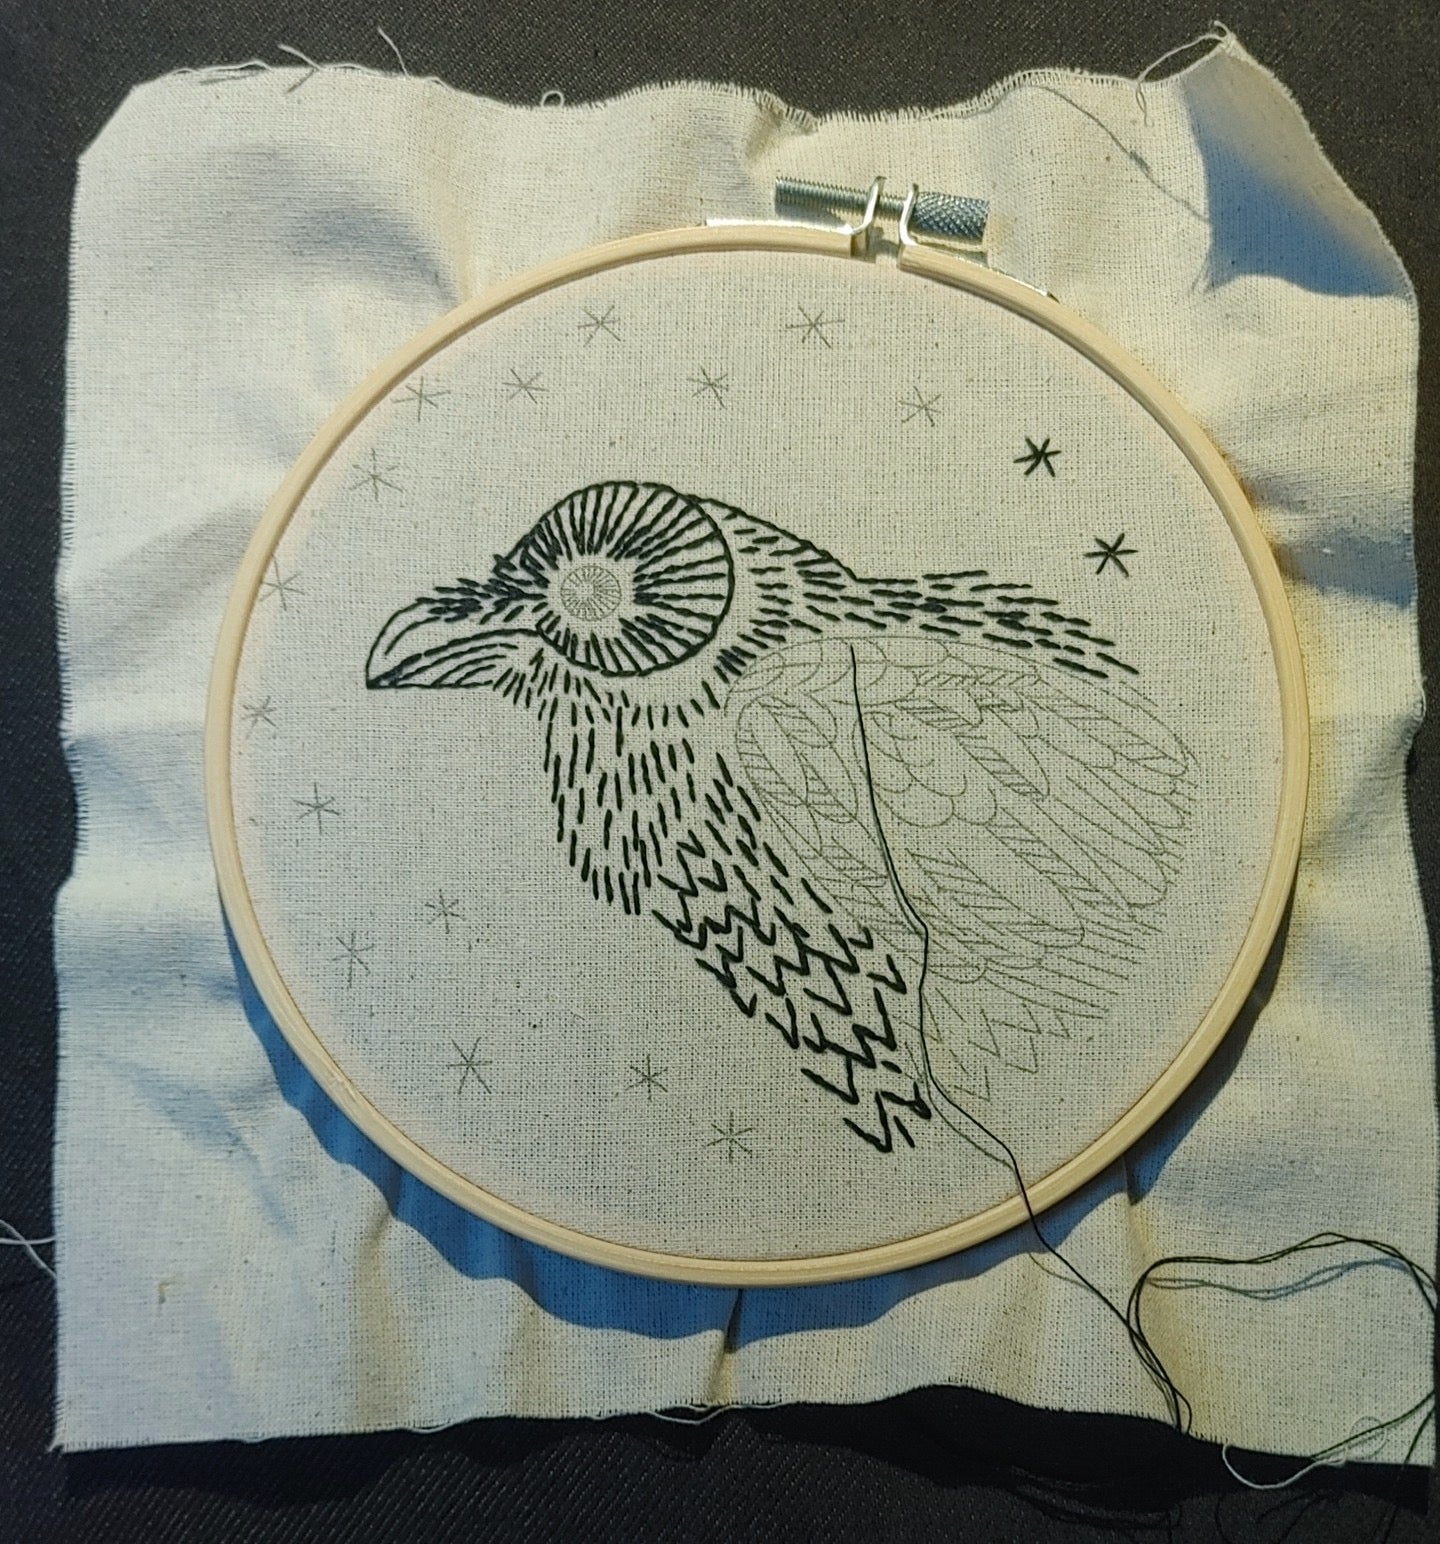 Raven embroidery "Nevermore" from Hook,Line & Tinker kit